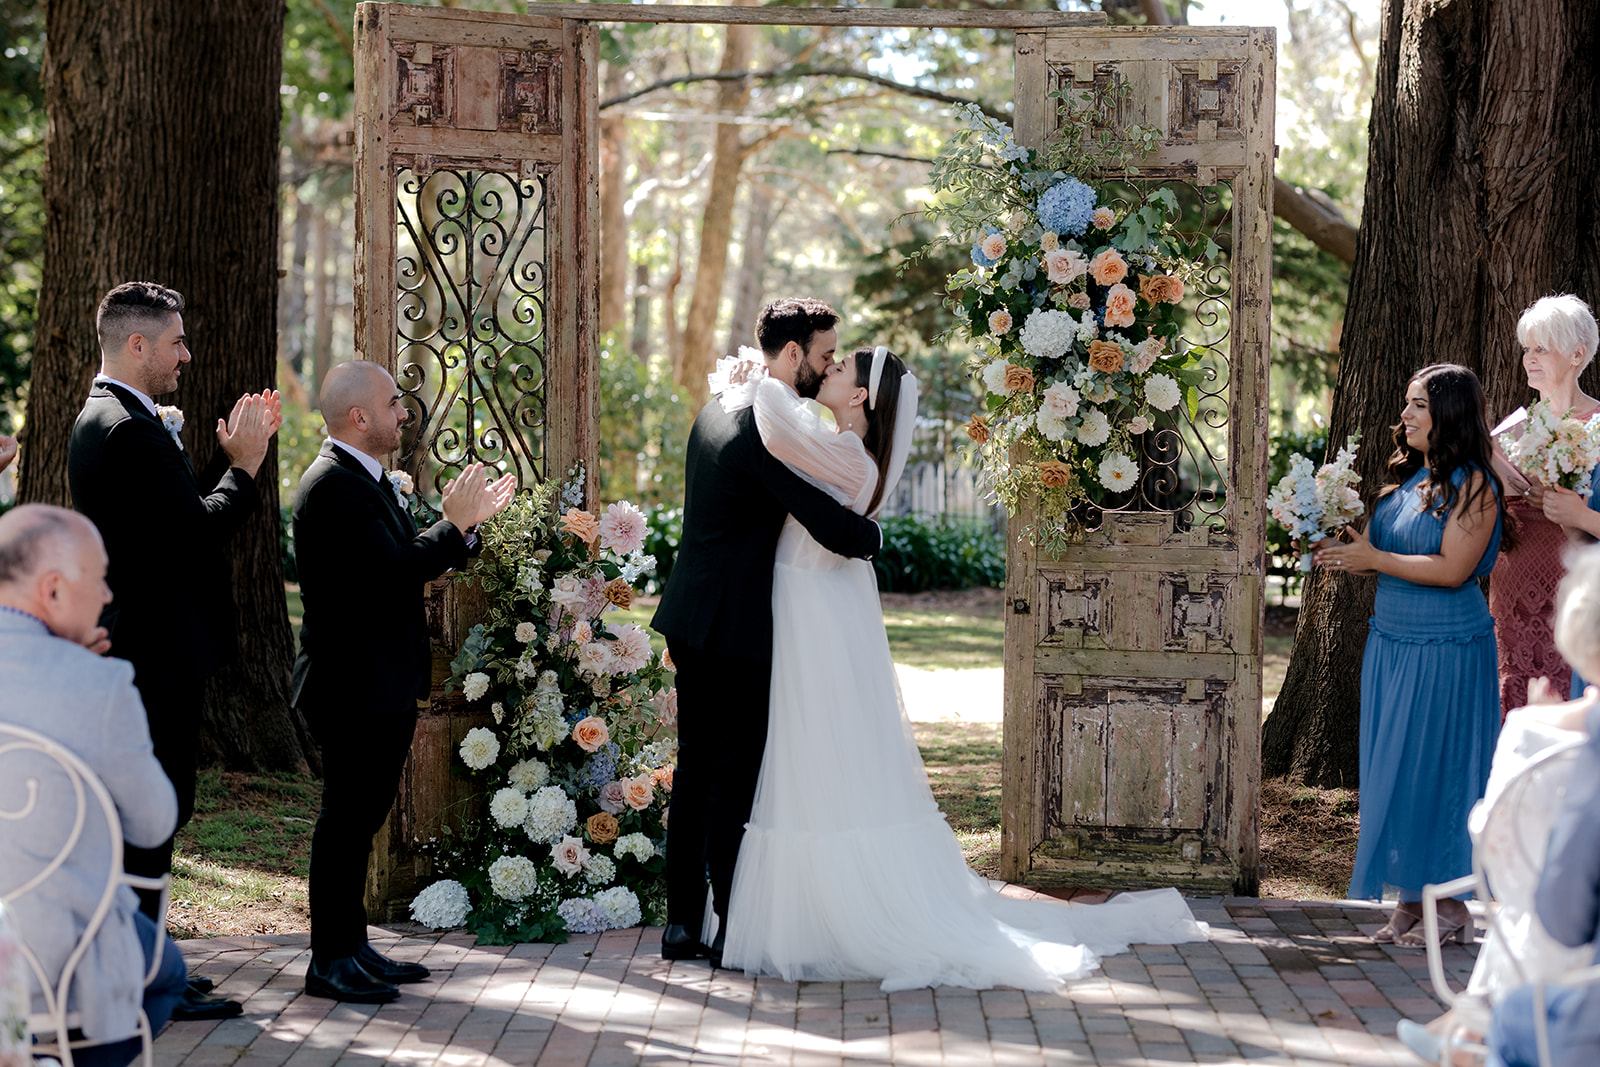 Portrait of bride & groom exchanging their first kiss at their elegant country wedding ceremony.